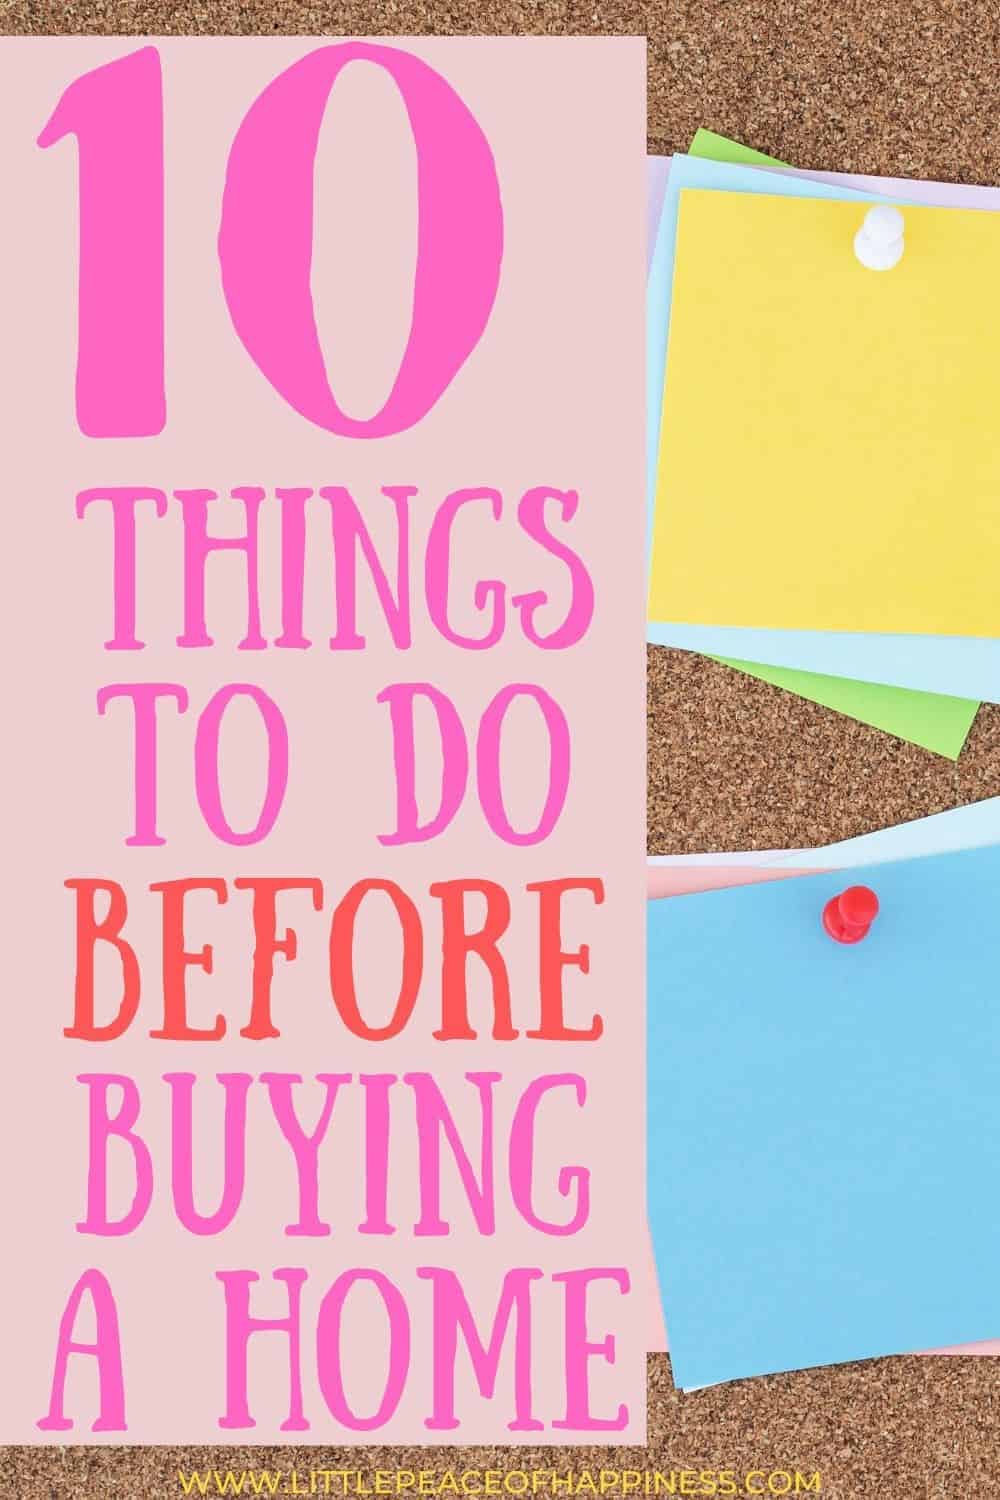 10 Tips for Homebuyers